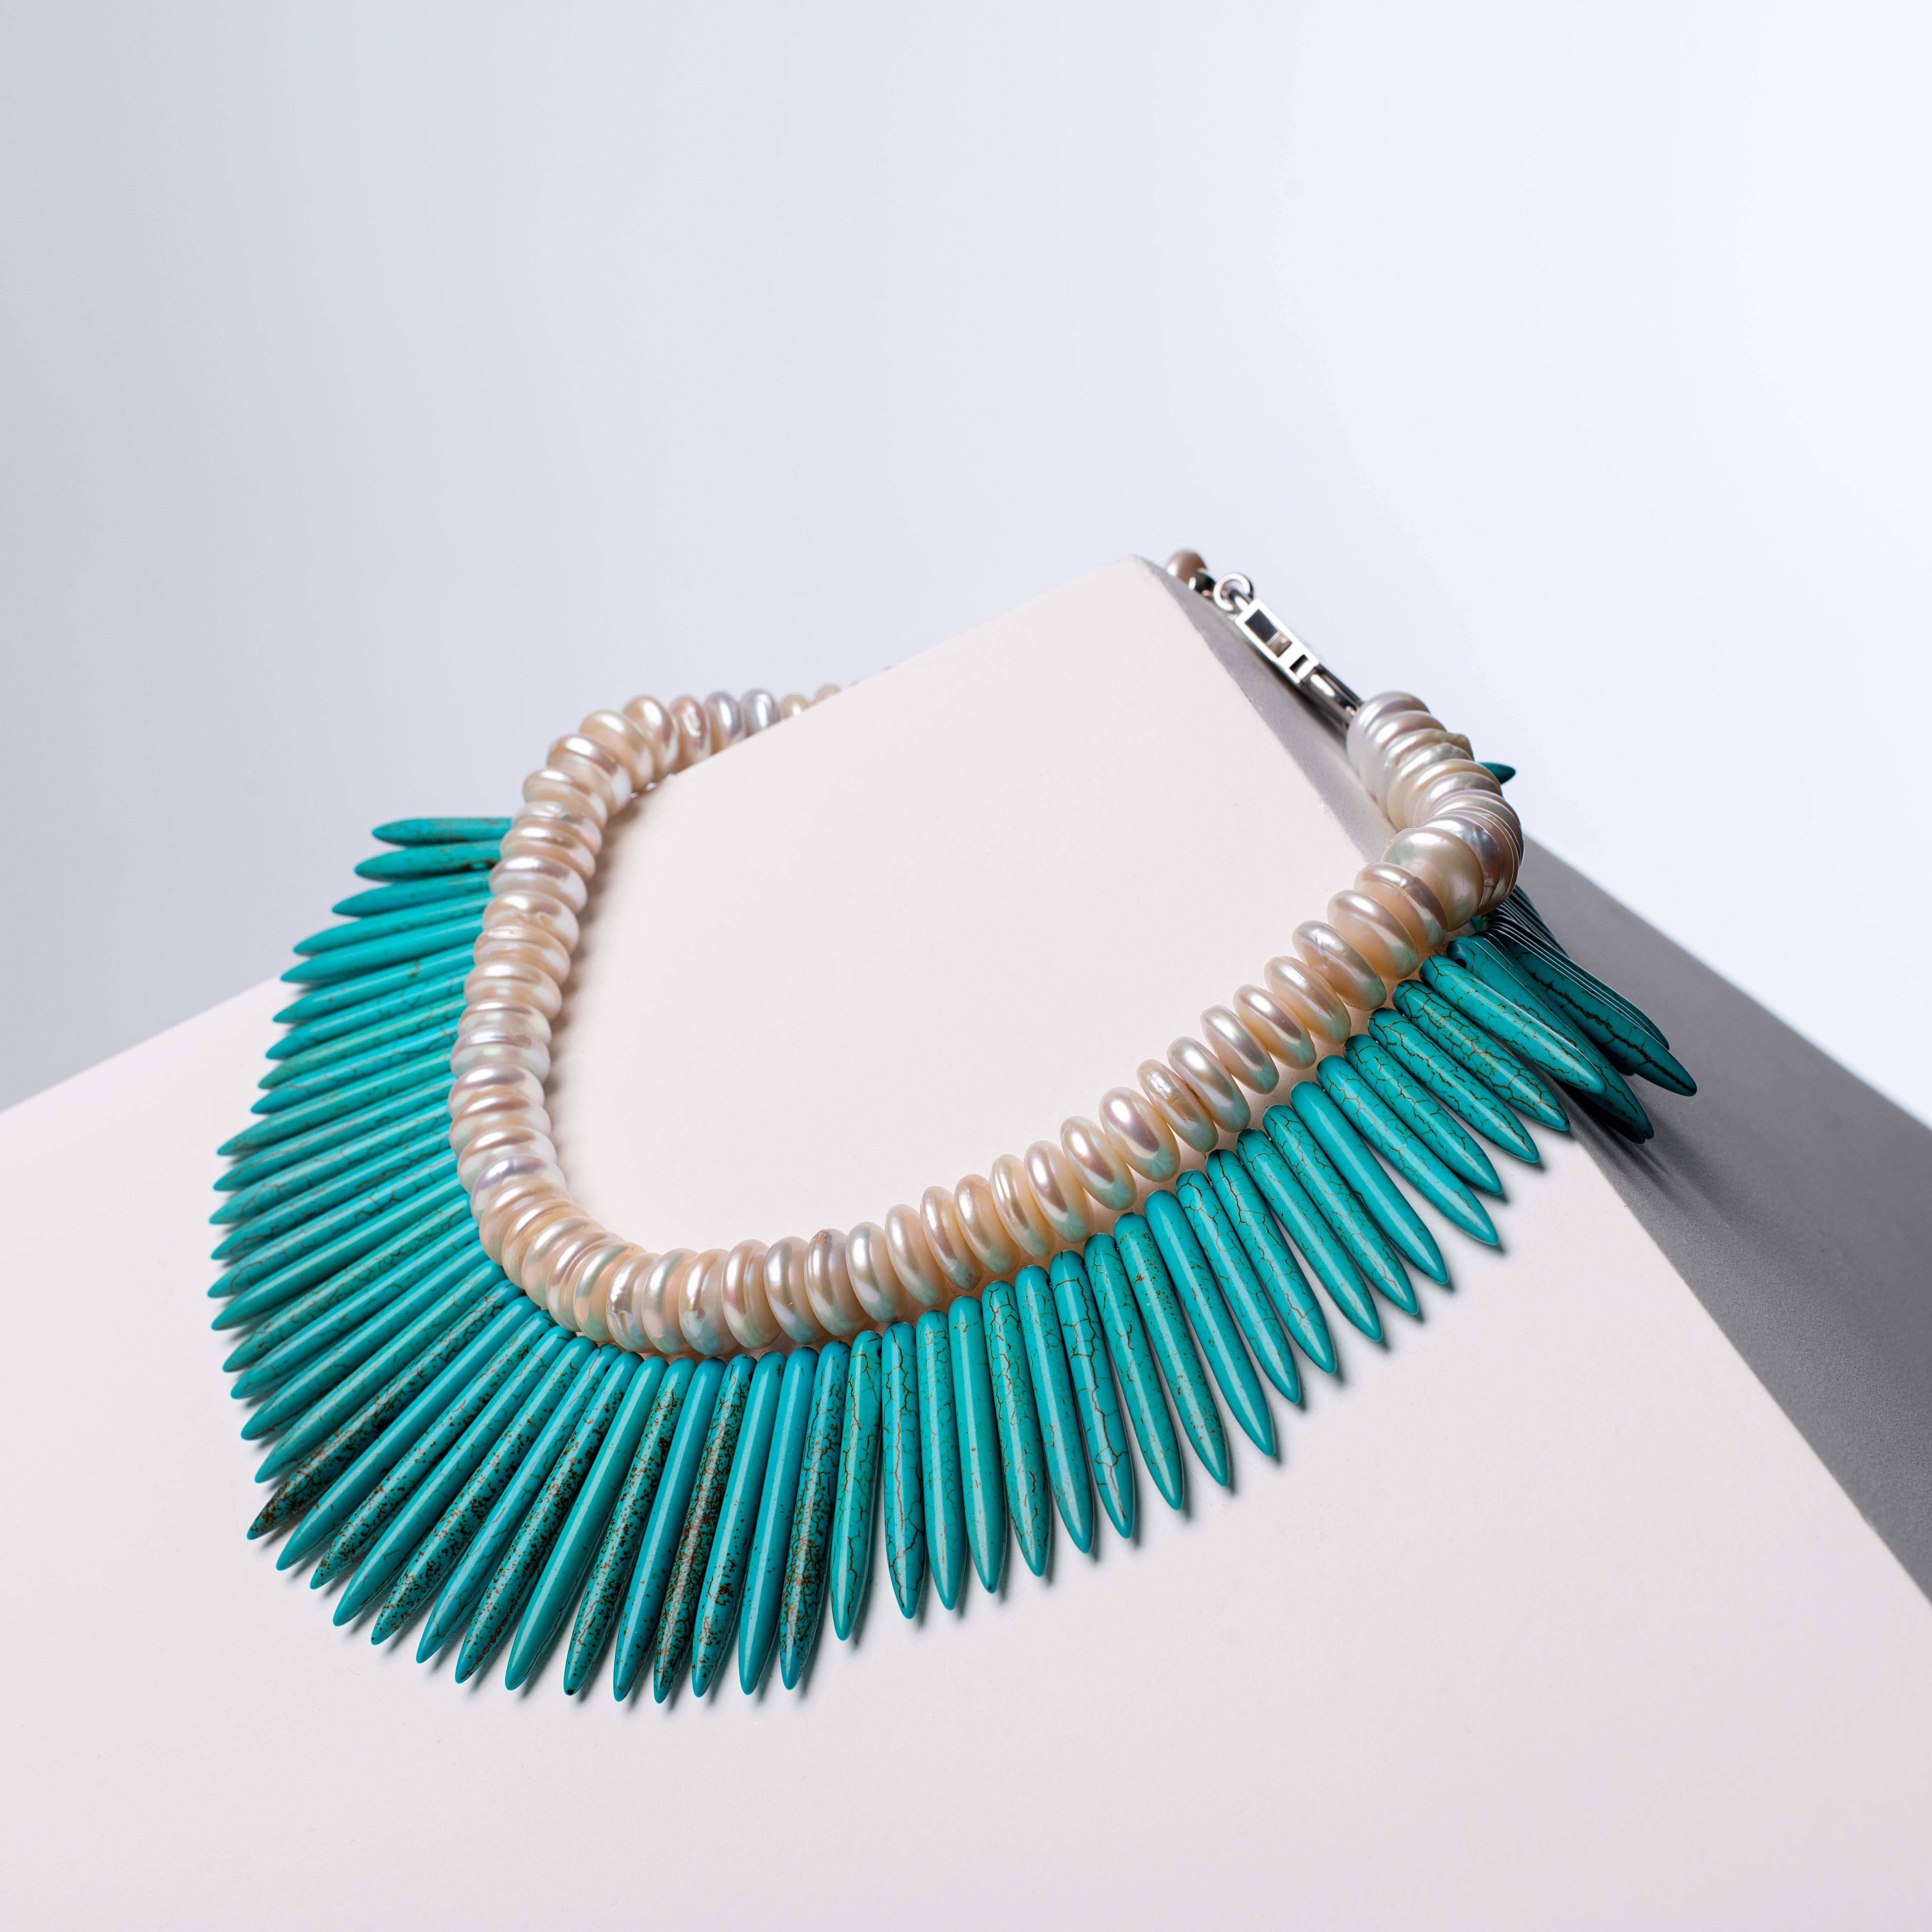 - Two distinct necklaces in one set — a Rondelle Pearl necklace and a spike cut Turquoise Howlite necklace, offering versatile wear and combination possibilities.
- Rondelle Pearl row measuring 40 cm and weighing 120g, paired with a Turquoise